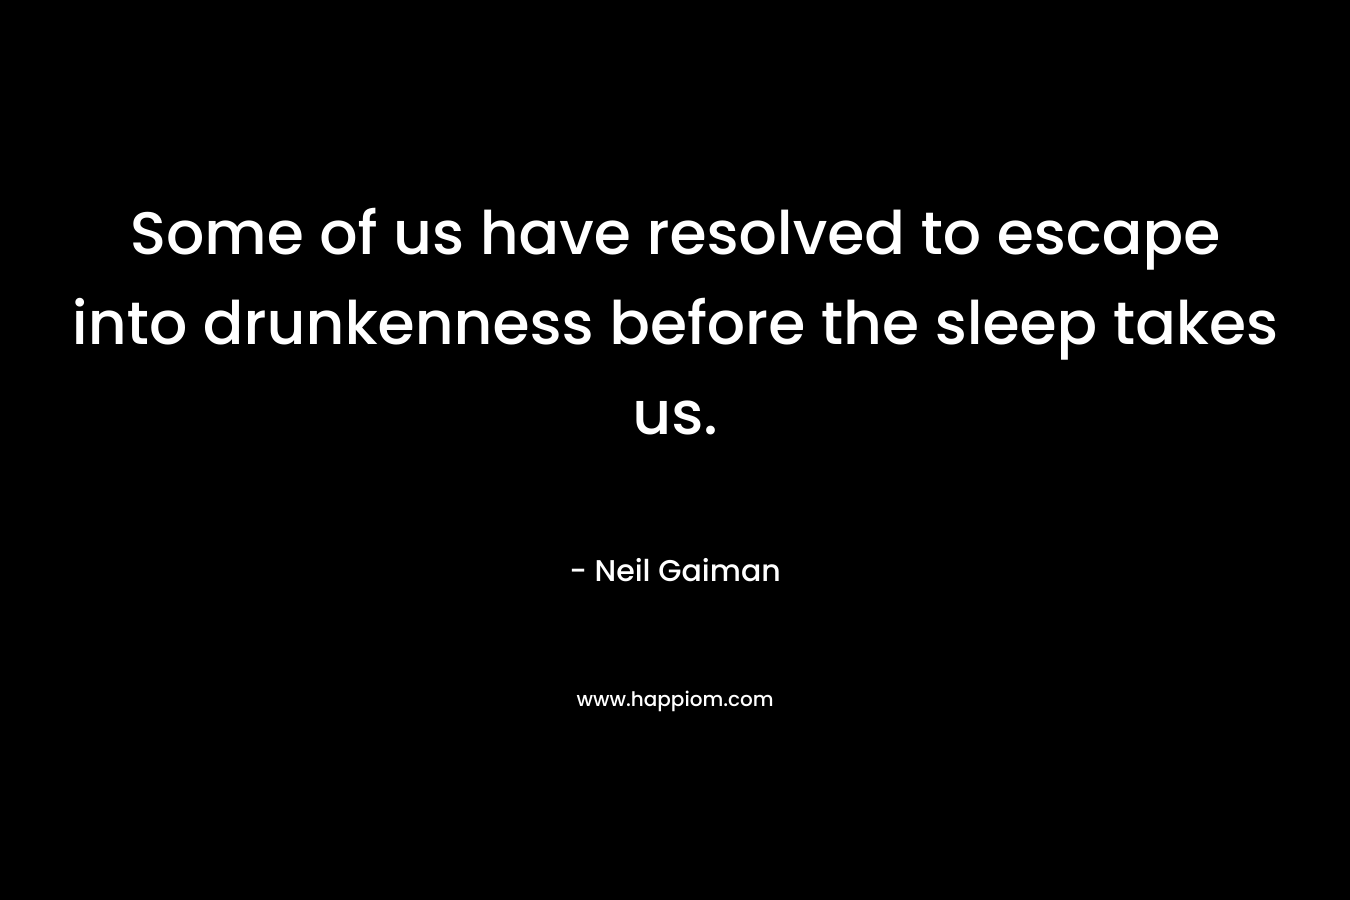 Some of us have resolved to escape into drunkenness before the sleep takes us.